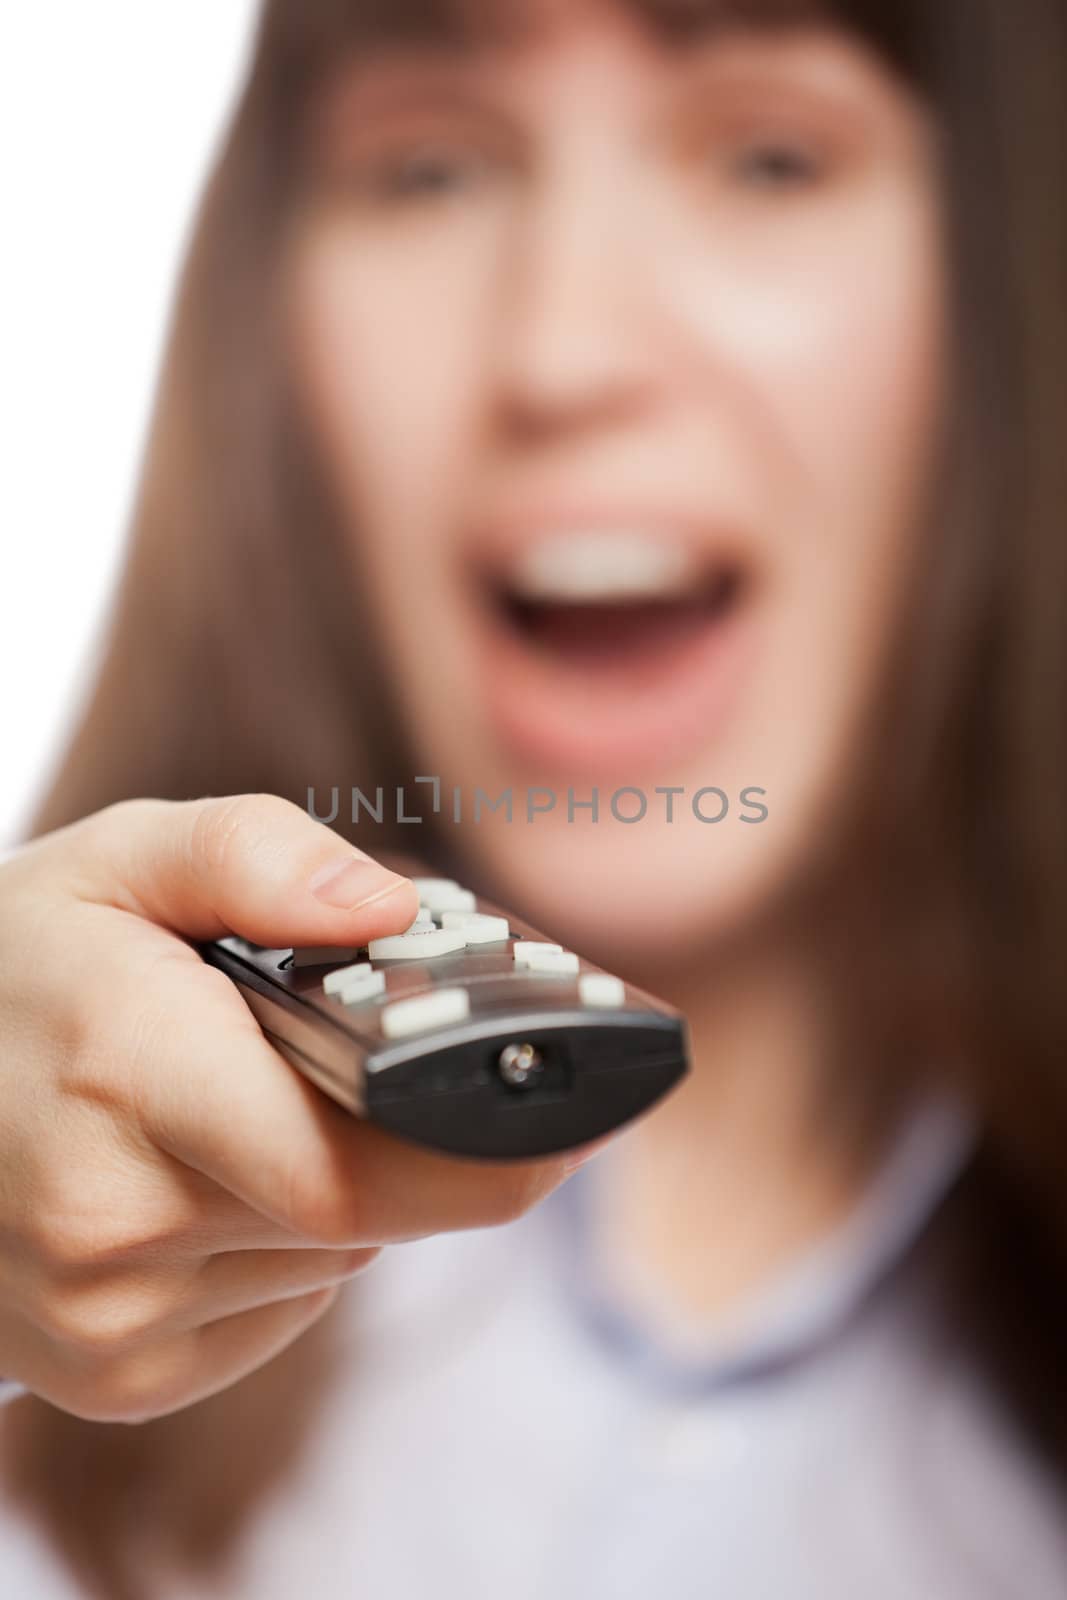 Amazed or surprised woman hand holding television remote control and changing channel